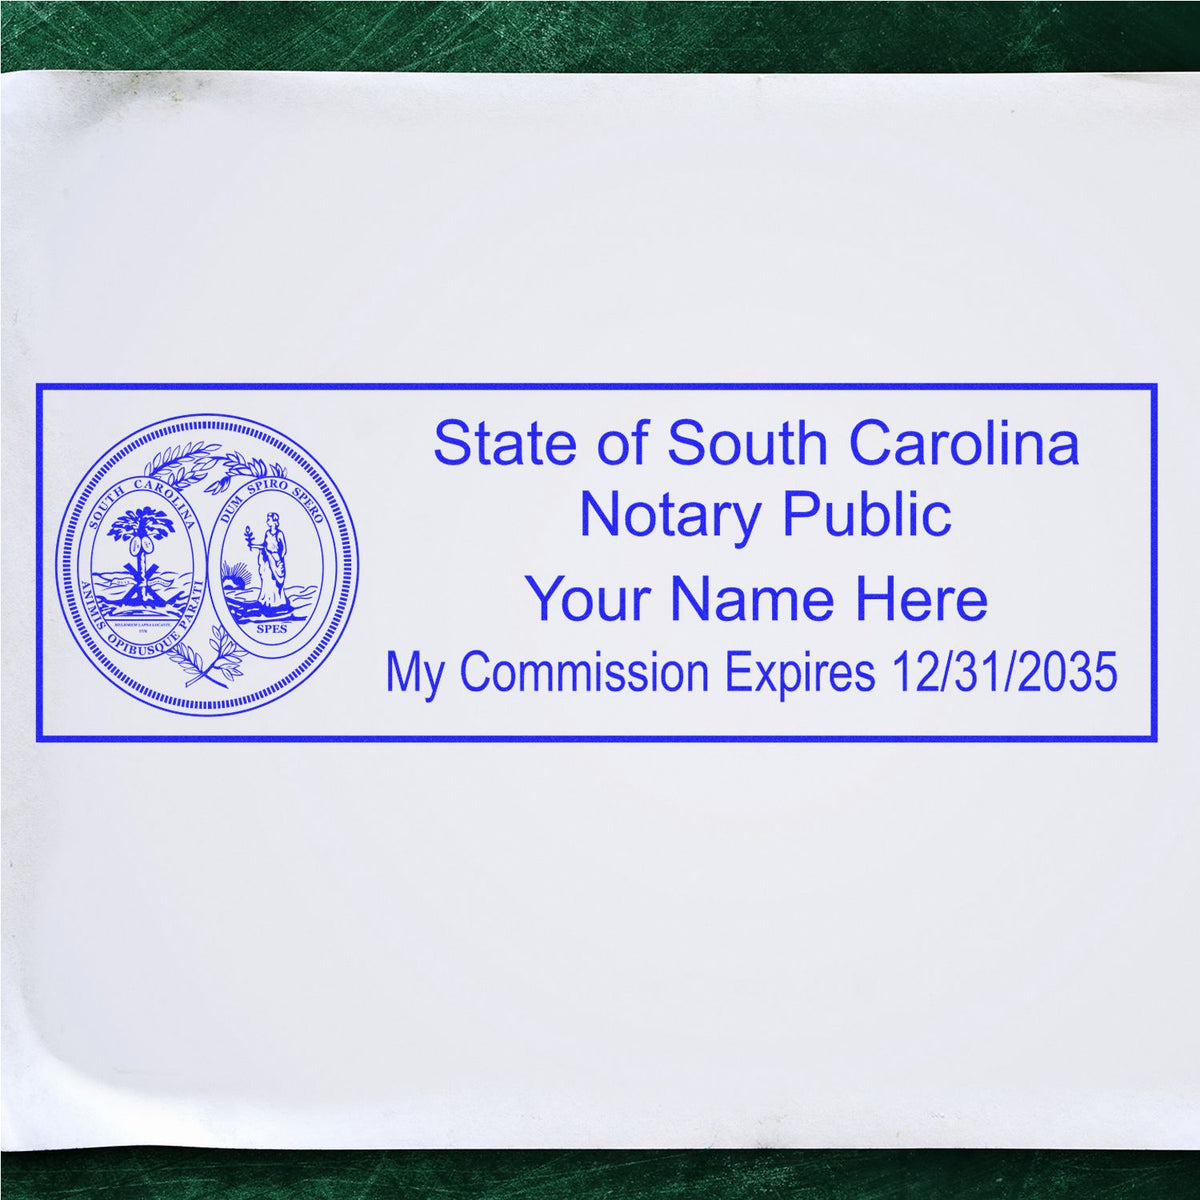 An alternative view of the Super Slim South Carolina Notary Public Stamp stamped on a sheet of paper showing the image in use